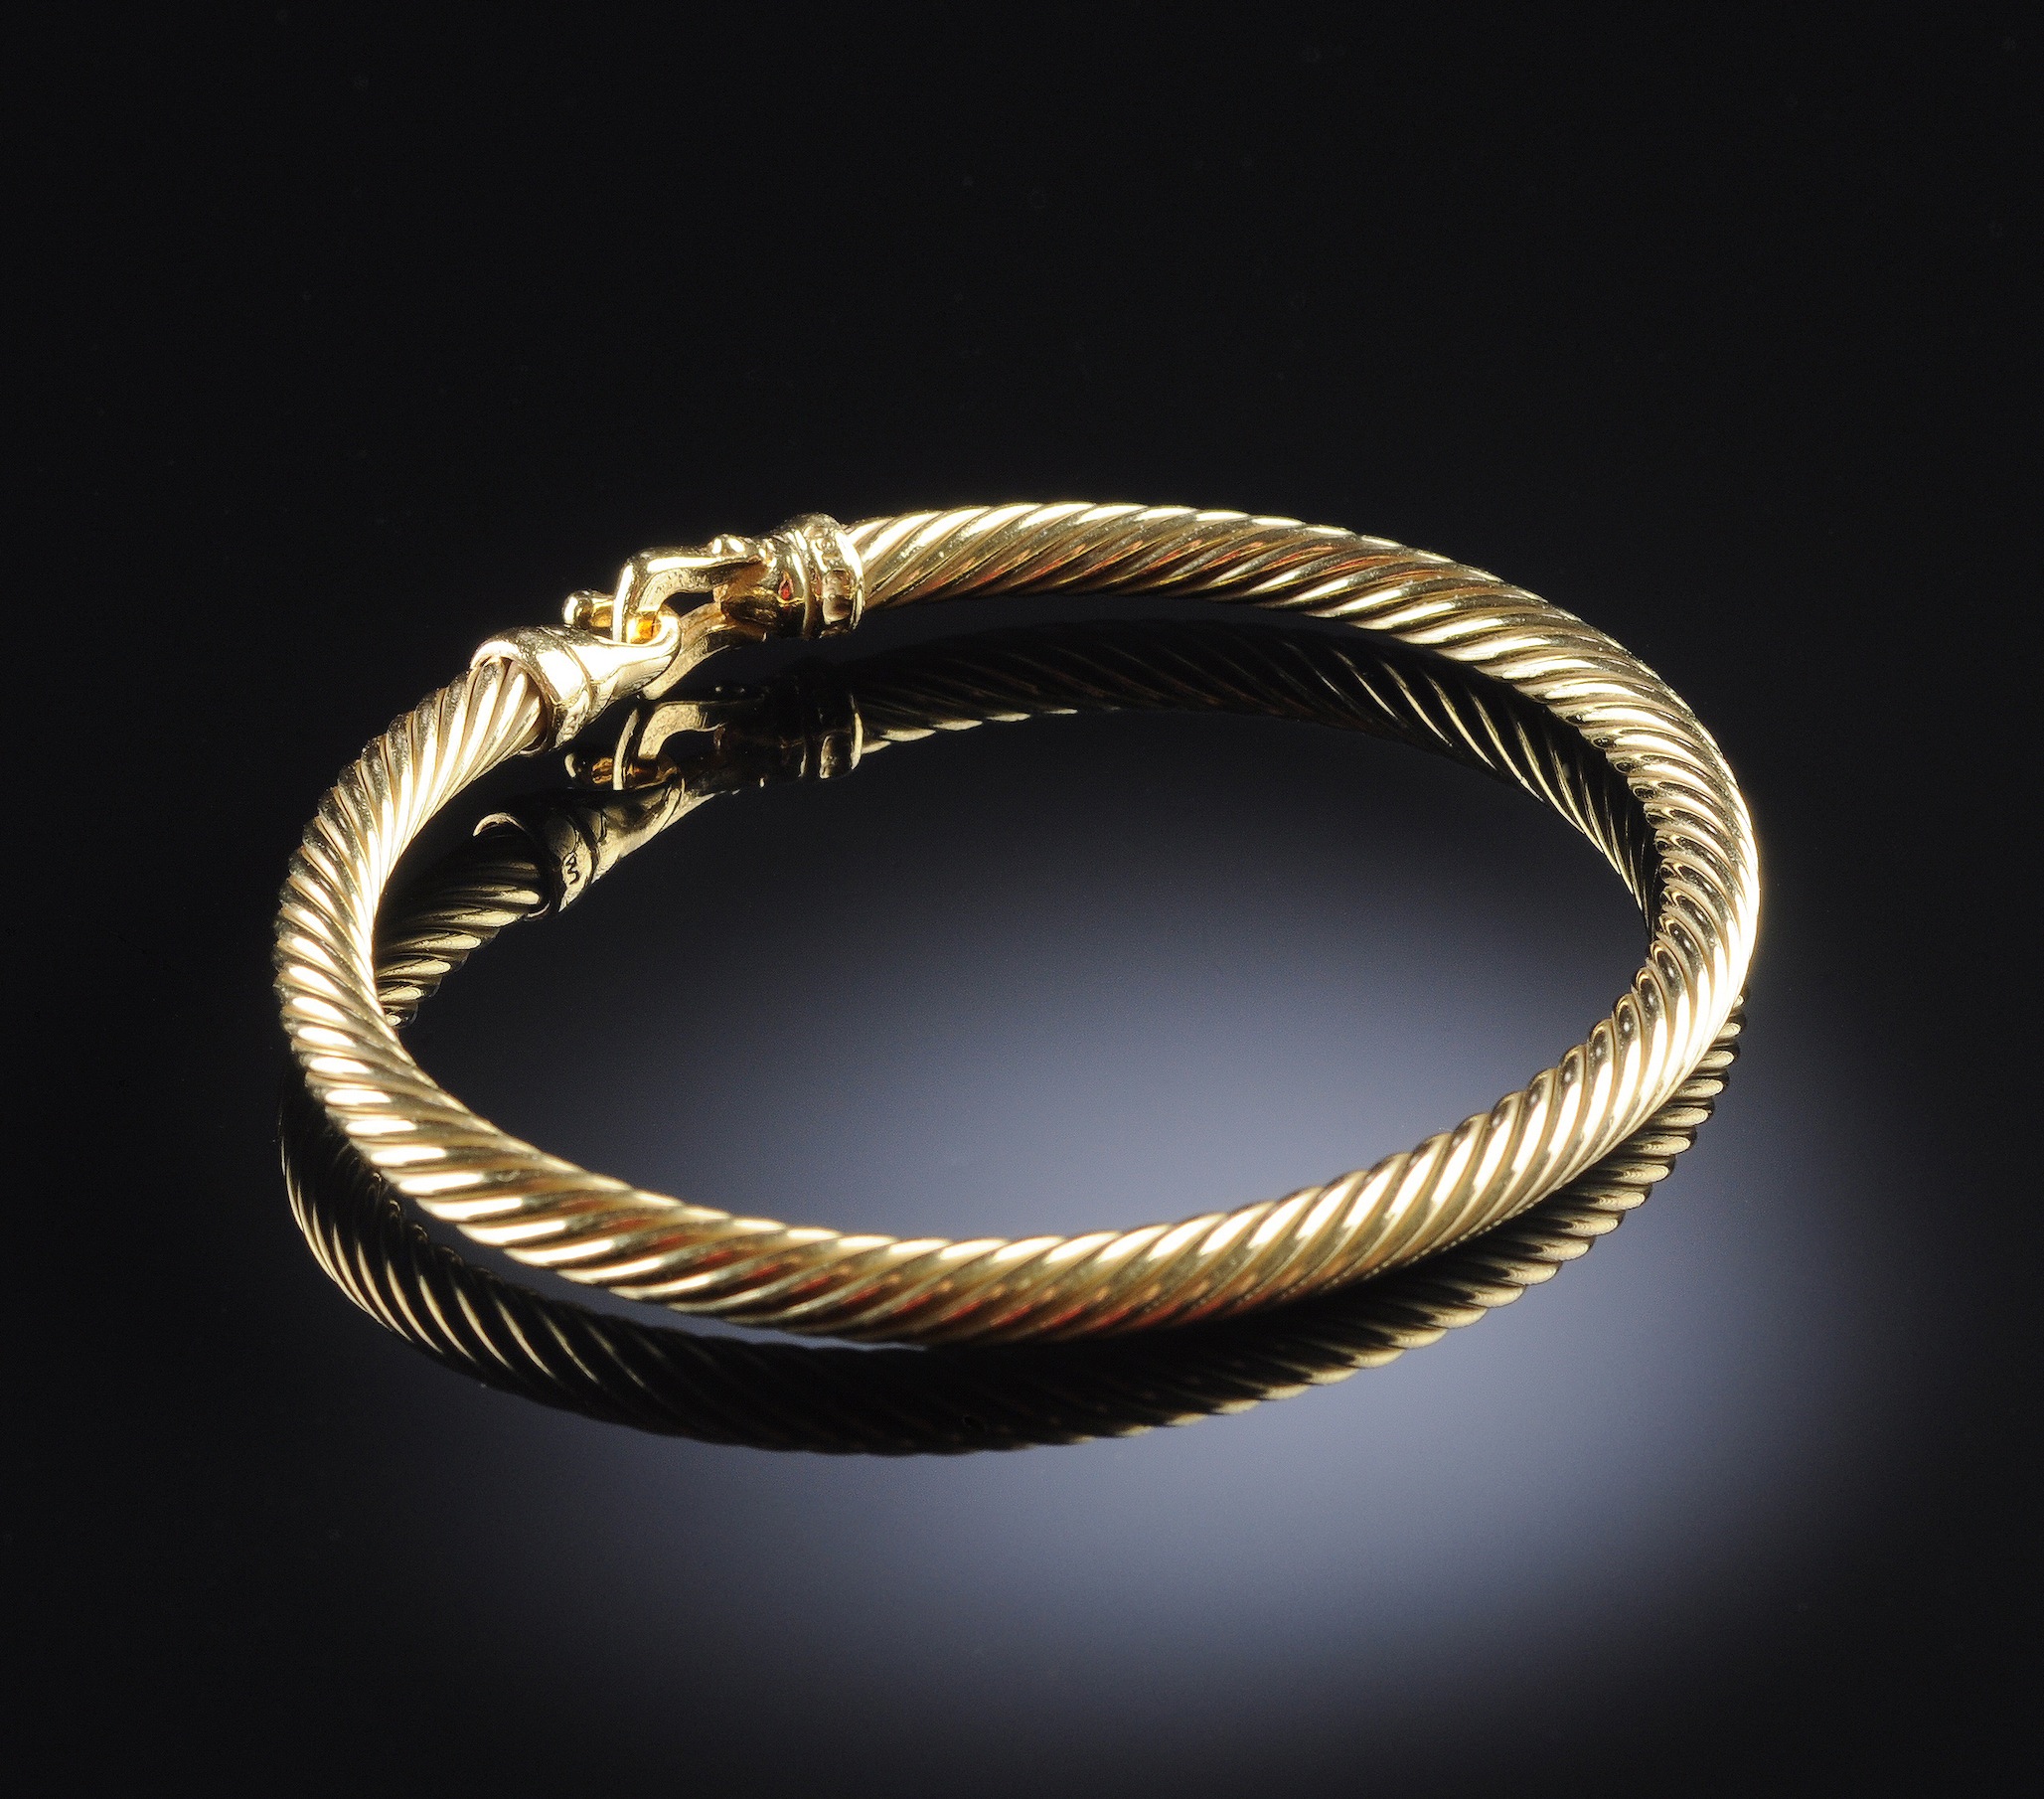 AN 18K DAVID YURMAN LADY`S CABLE BRACELET, the yellow gold band measuring 4 millimeters in